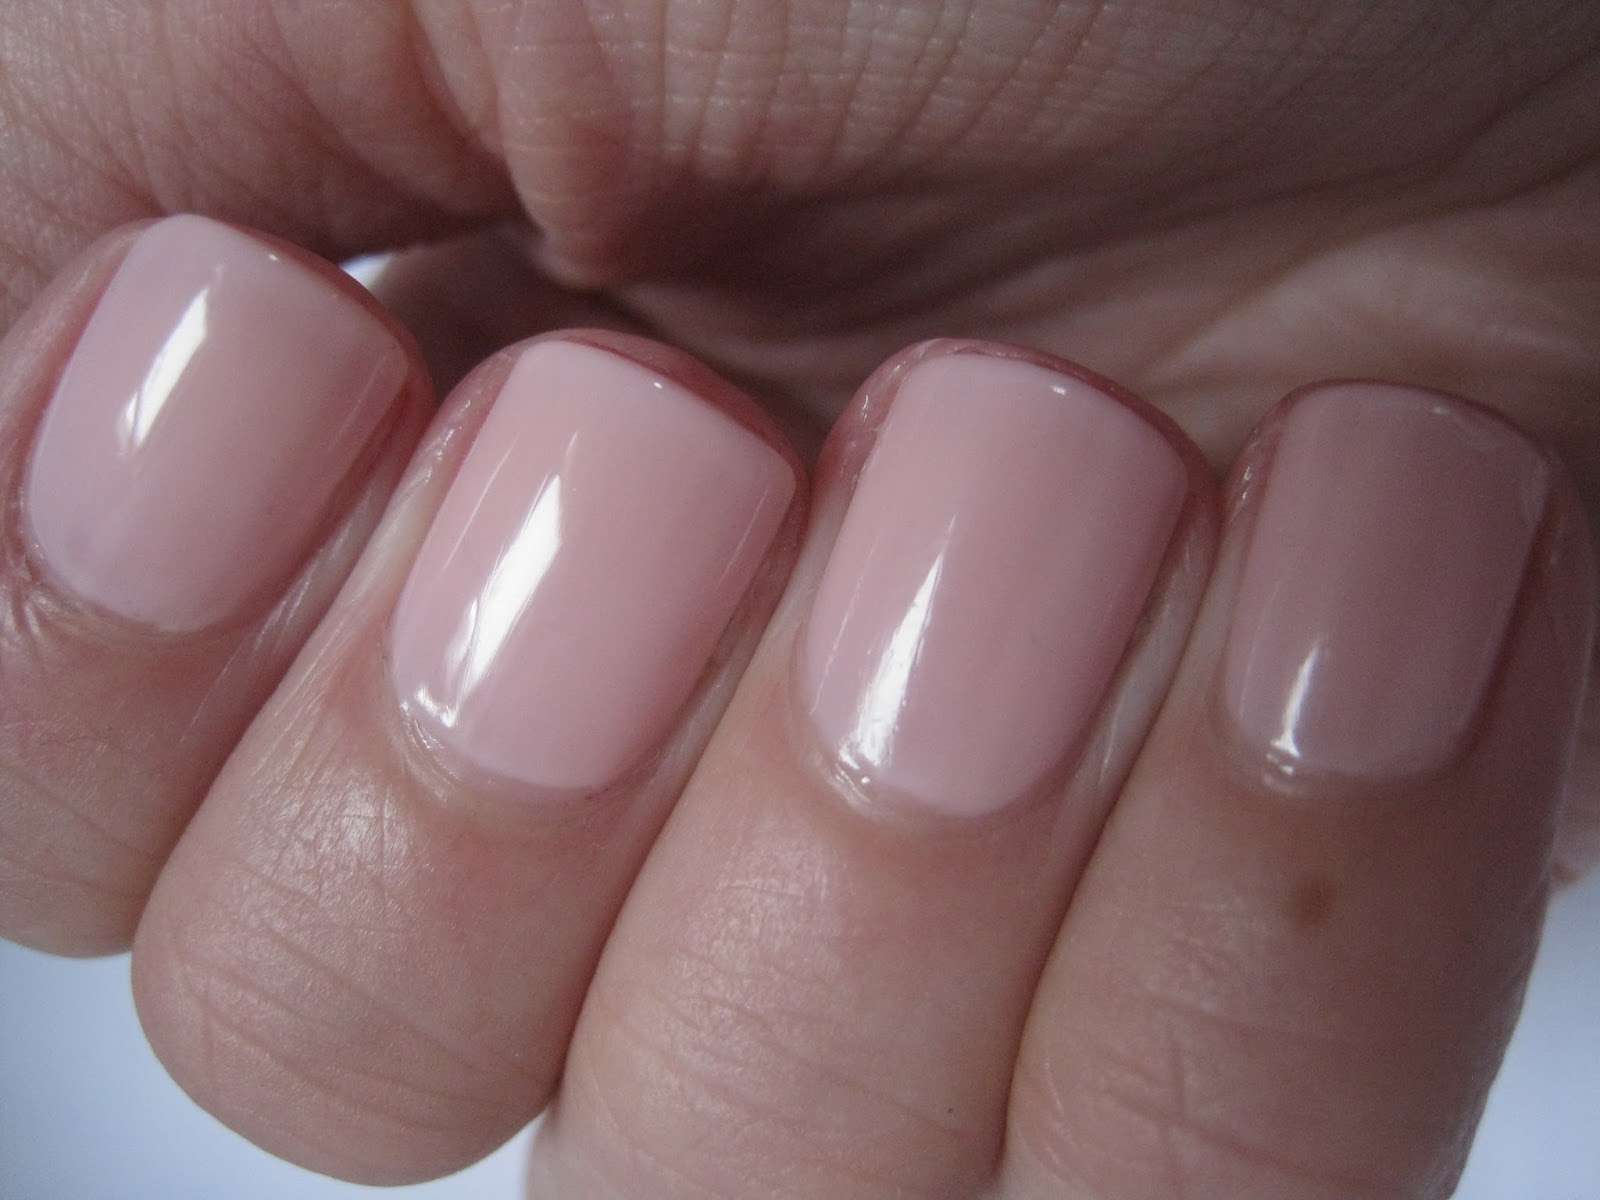 China Glaze Nail Lacquer in Innocence - wide 10